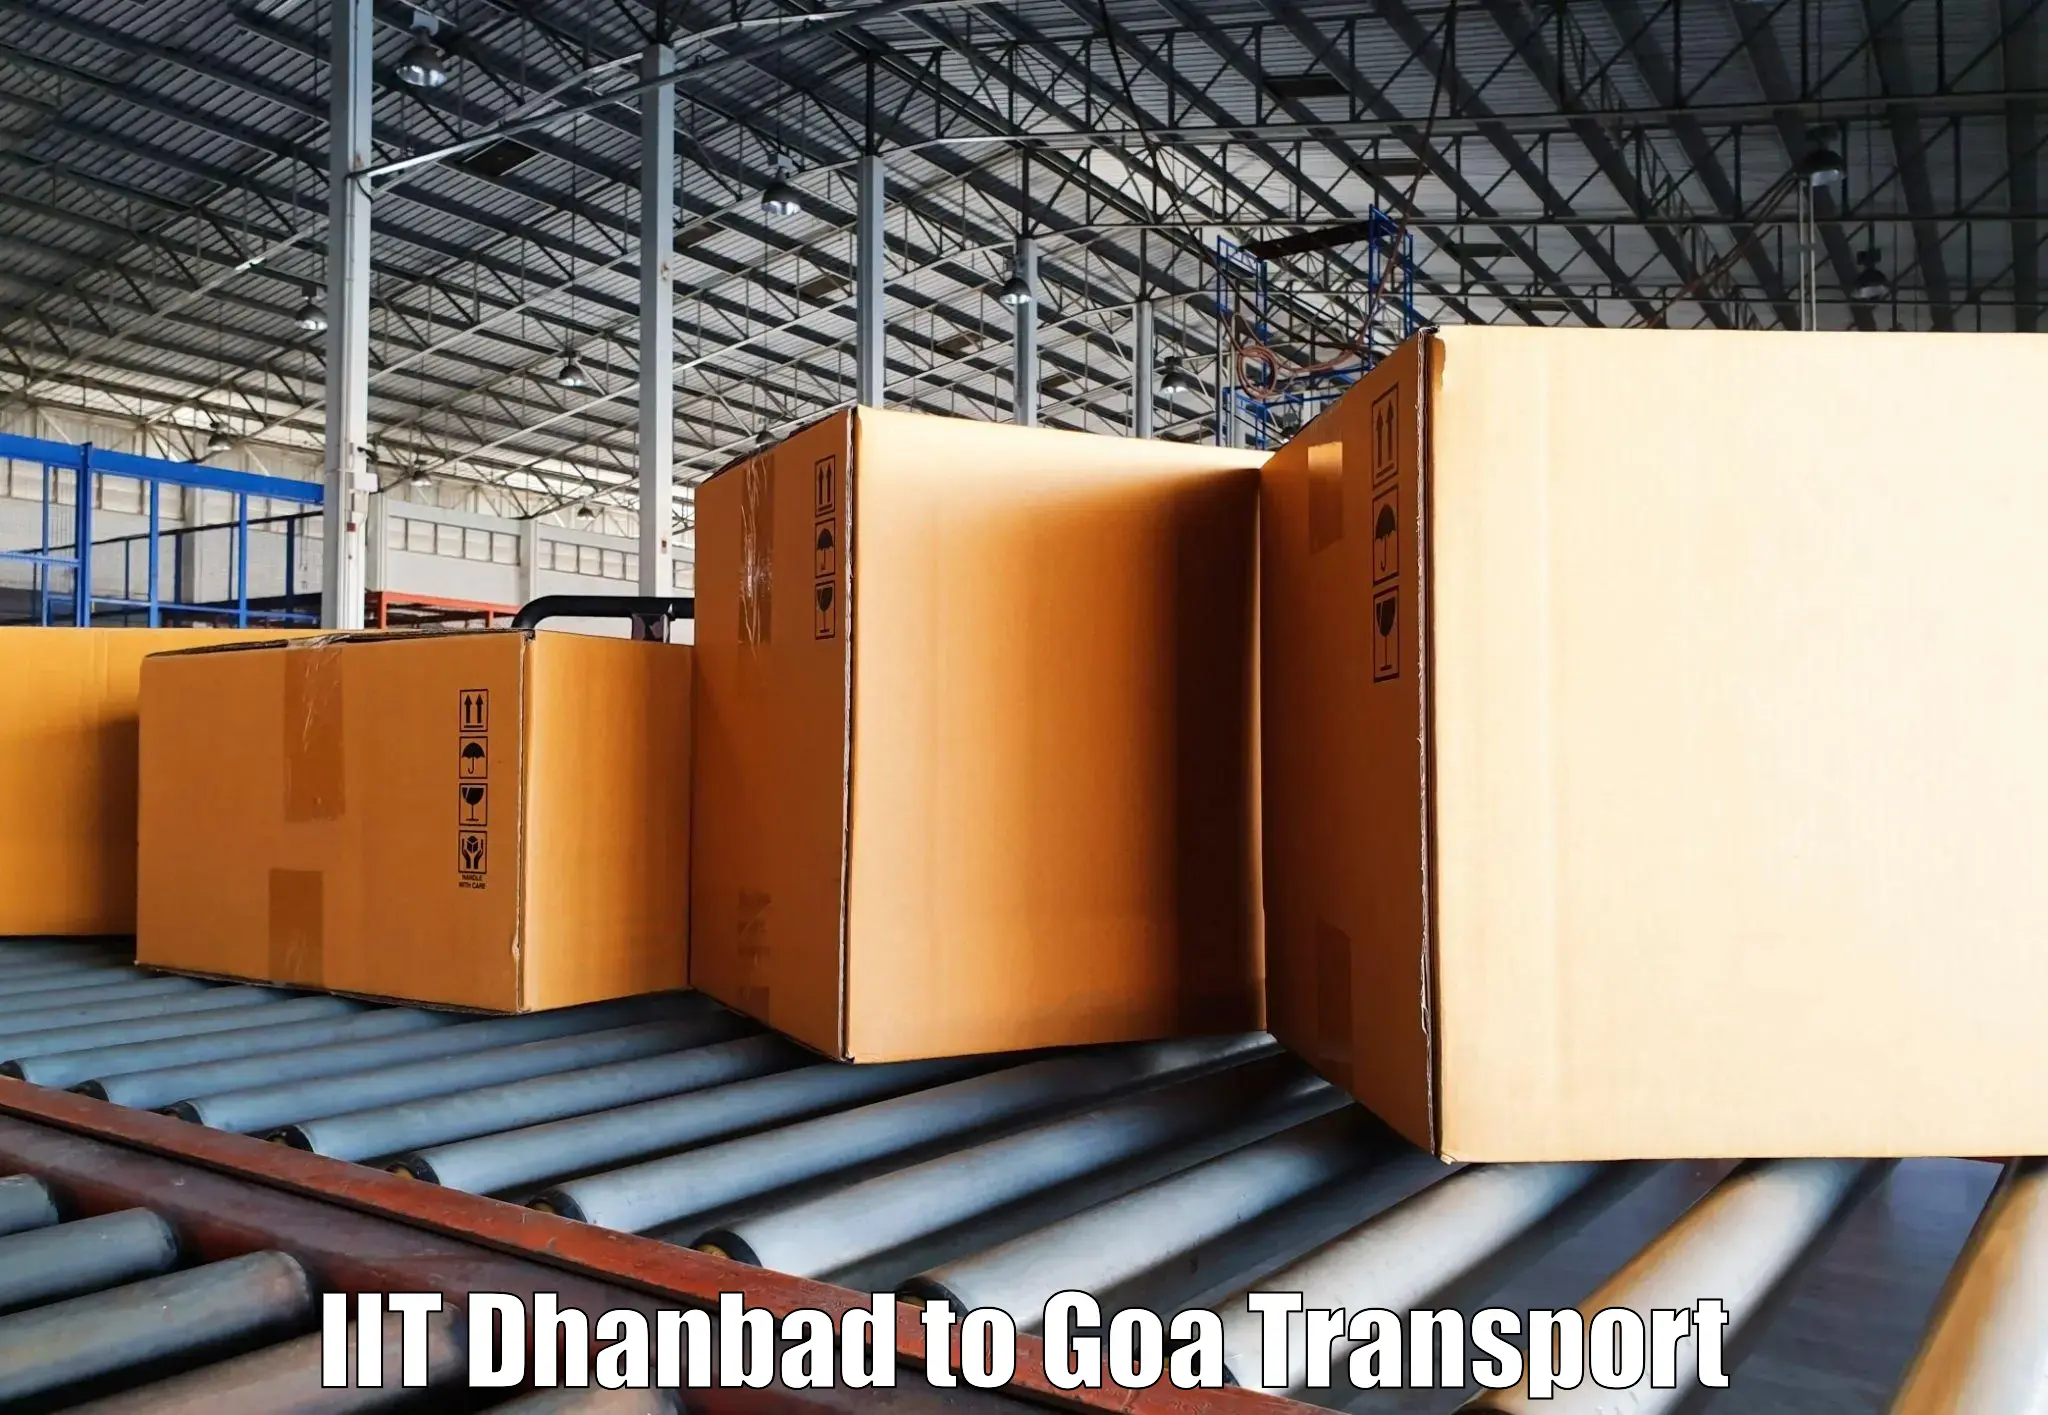 Bike transport service in IIT Dhanbad to South Goa